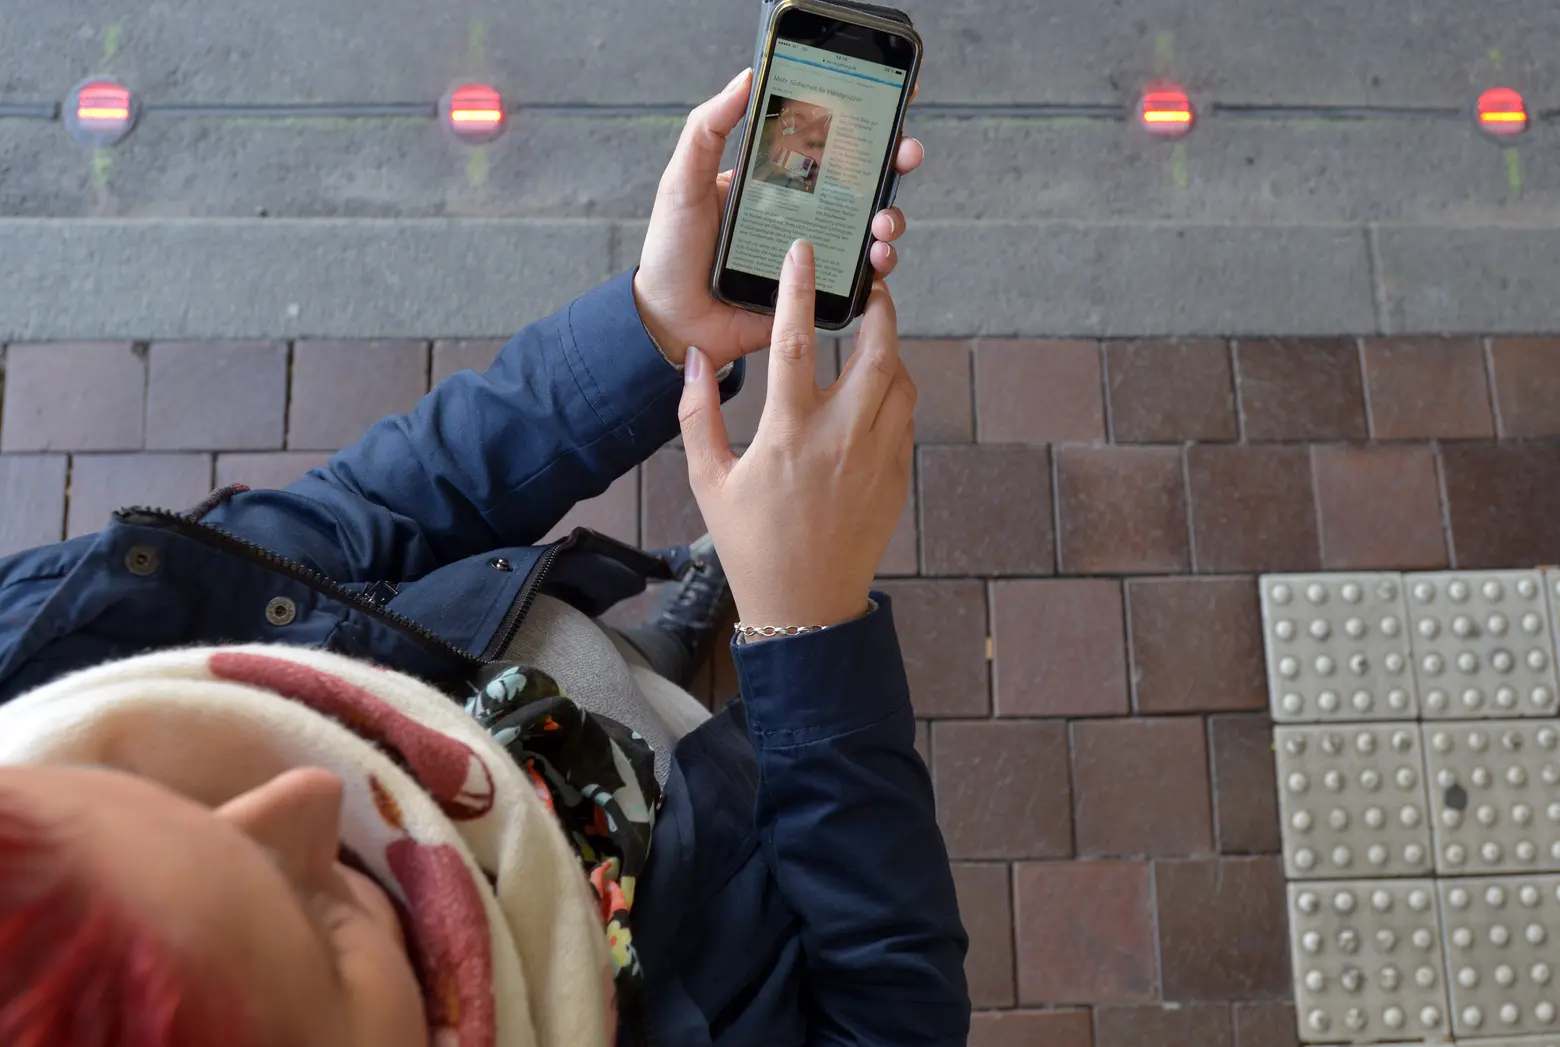 Don’t Look Up: Would Traffic Signals in the Pavement Protect NYC Phone Gazers?